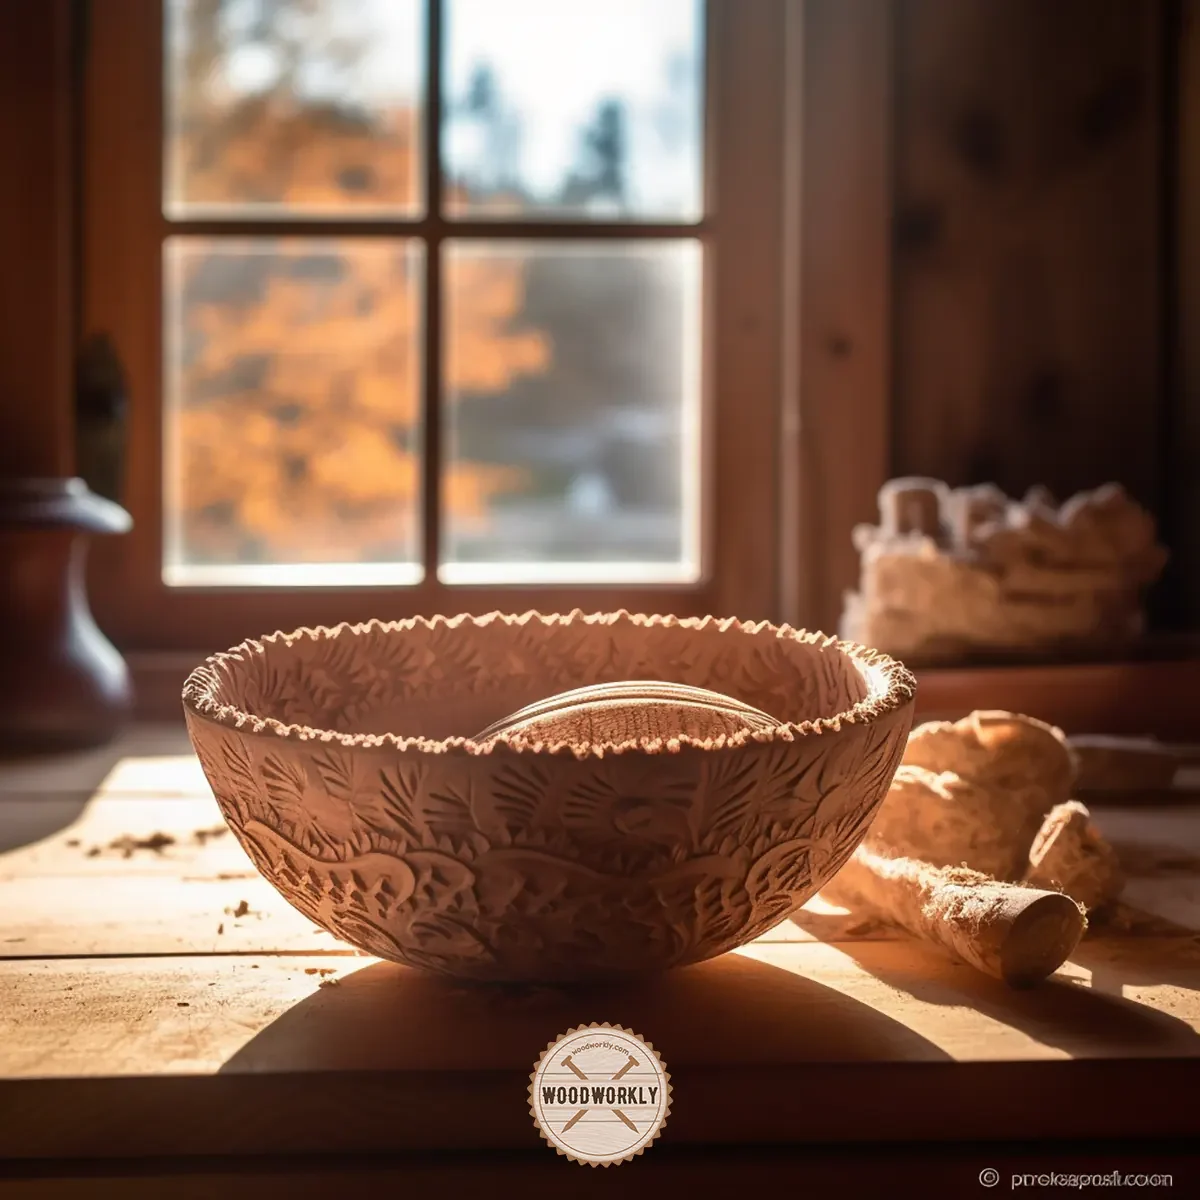 carved kitchen bowl with lots of fine details